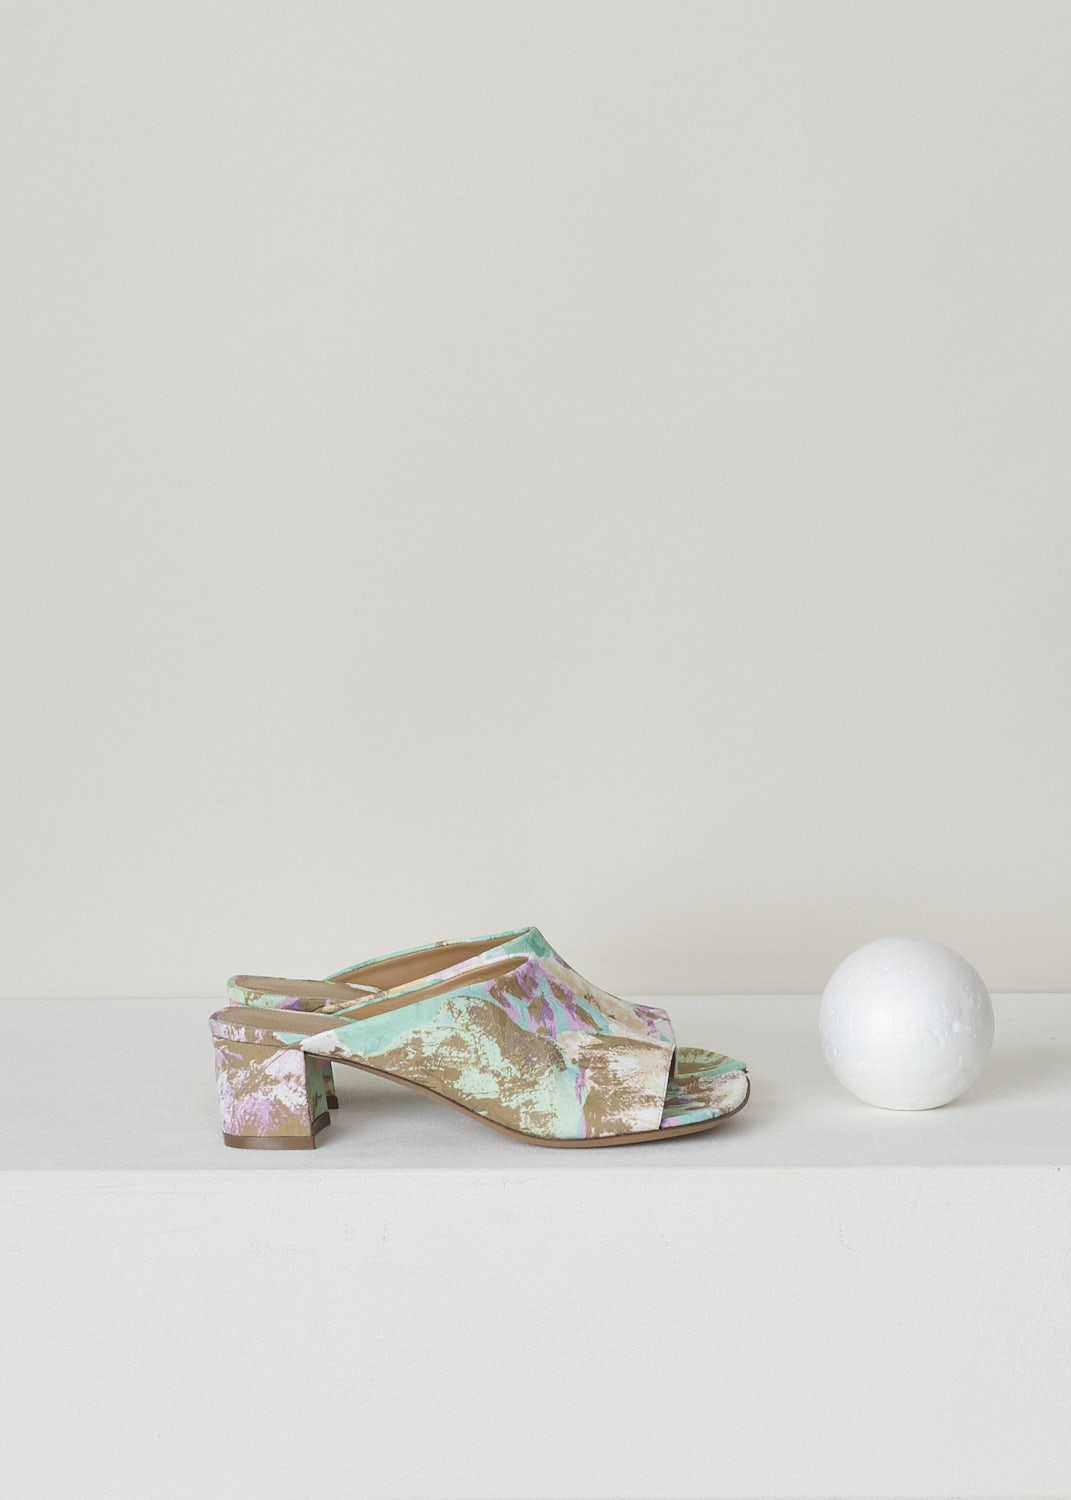 DRIES VAN NOTEN, MULTICOLOR MULES WITH BLOCK HEEL, WS231_285_QU704_DES_A975, Print, Green, Purple, Side, These heeled slip-on mules have a multicolored print with green, pink and beige hues. These mules have a square open-toe front and a block heel. 

